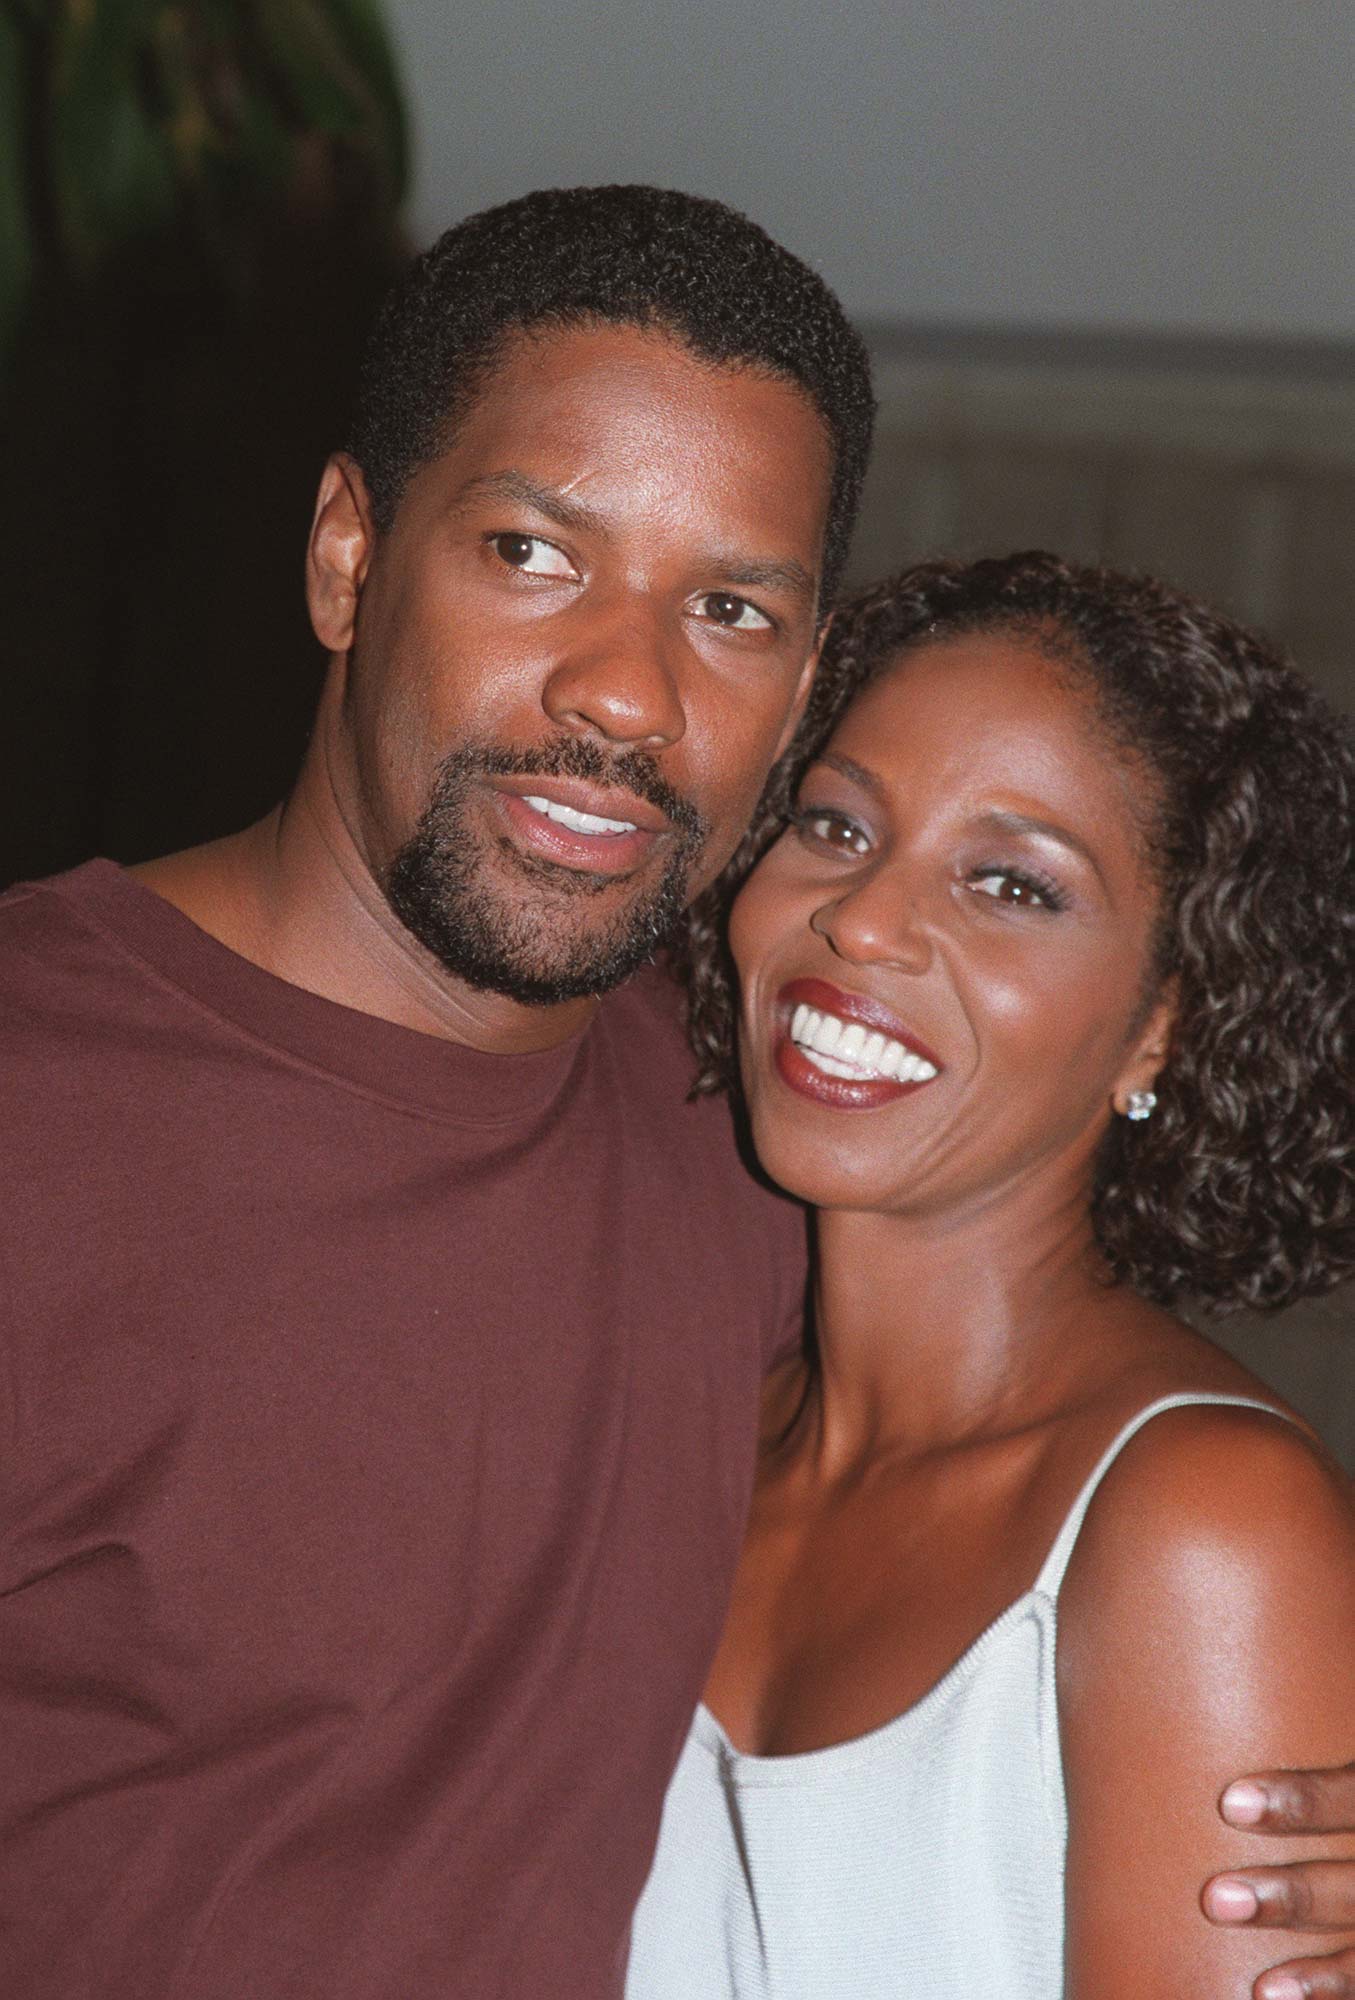 <p><a href="https://www.wonderwall.com/celebrity/profiles/overview/denzel-washington-1078.article">Denzel Washington</a> first laid eyes on wife Pauletta on the set of "the first movie I ever did," a TV movie about Olympic runner Wilma Rudolph (he played Wilma's future husband and Pauletta was one of the track stars), he shared on "Live With Kelly and Ryan" in 2018. "I met her then but I didn't meet her then -- I saw her then. About a year later, there was a party and she was there, and at that party I had talked about going to see a play. I went to see the play and at intermission, the lights came up and she was sitting [there]. She said she just happened to go see it." They started dating and, as he once told "Access Hollywood," she turned down his first two proposals but accepted his third. Denzel and Pauletta married in 1983 and went on to welcome four kids.</p>